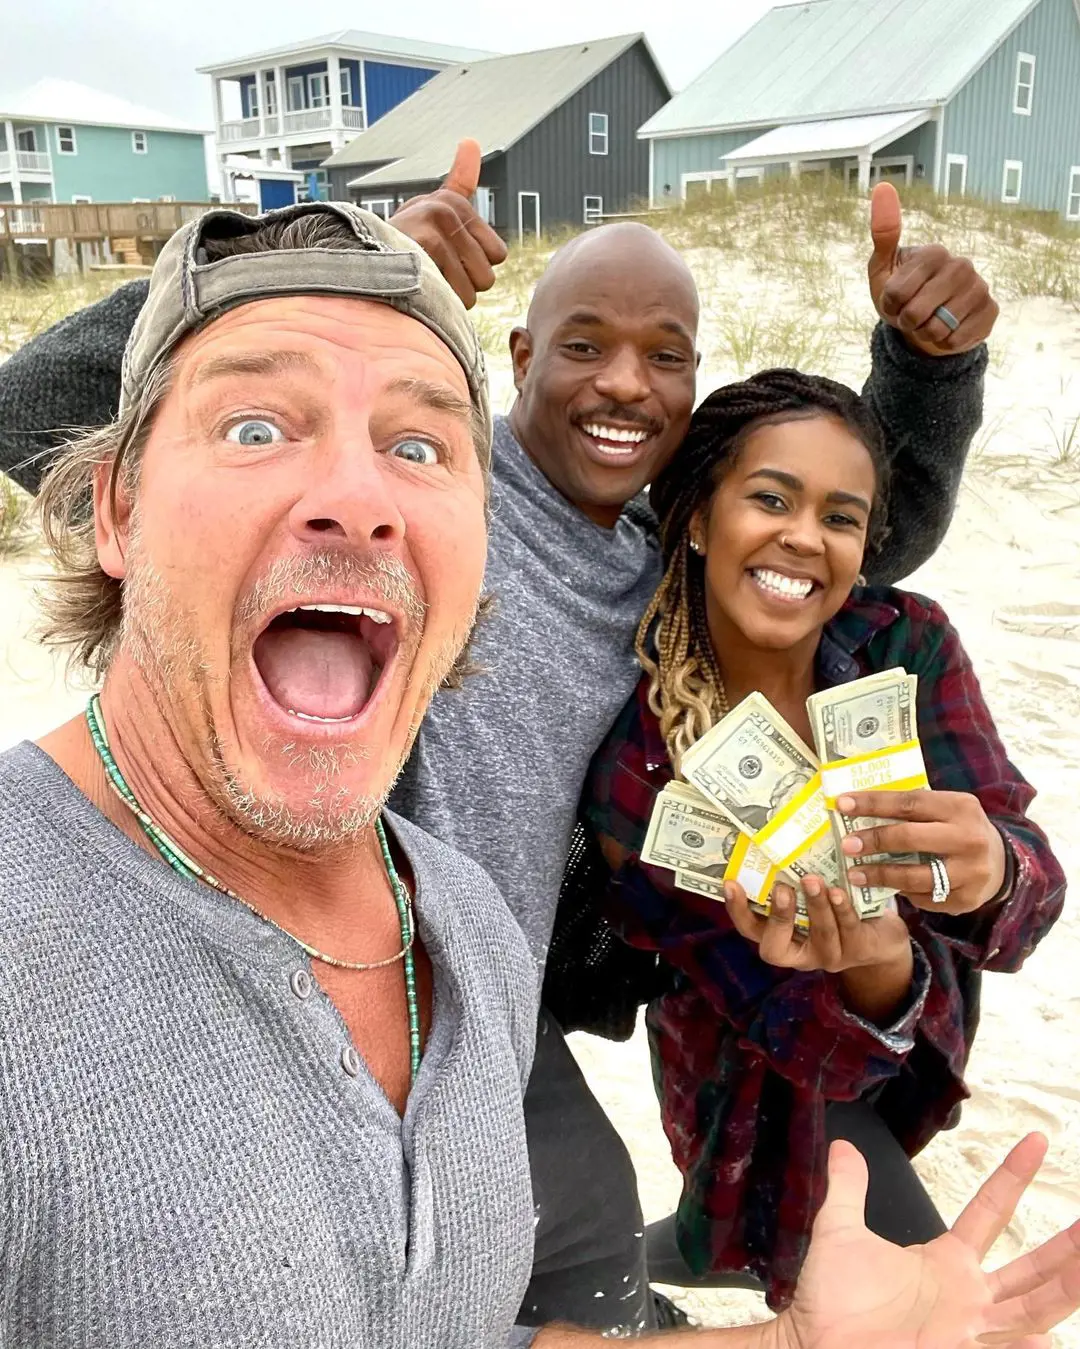 Ty Pennington with his teammate during the filming of the HGTV show Battle on the Beach